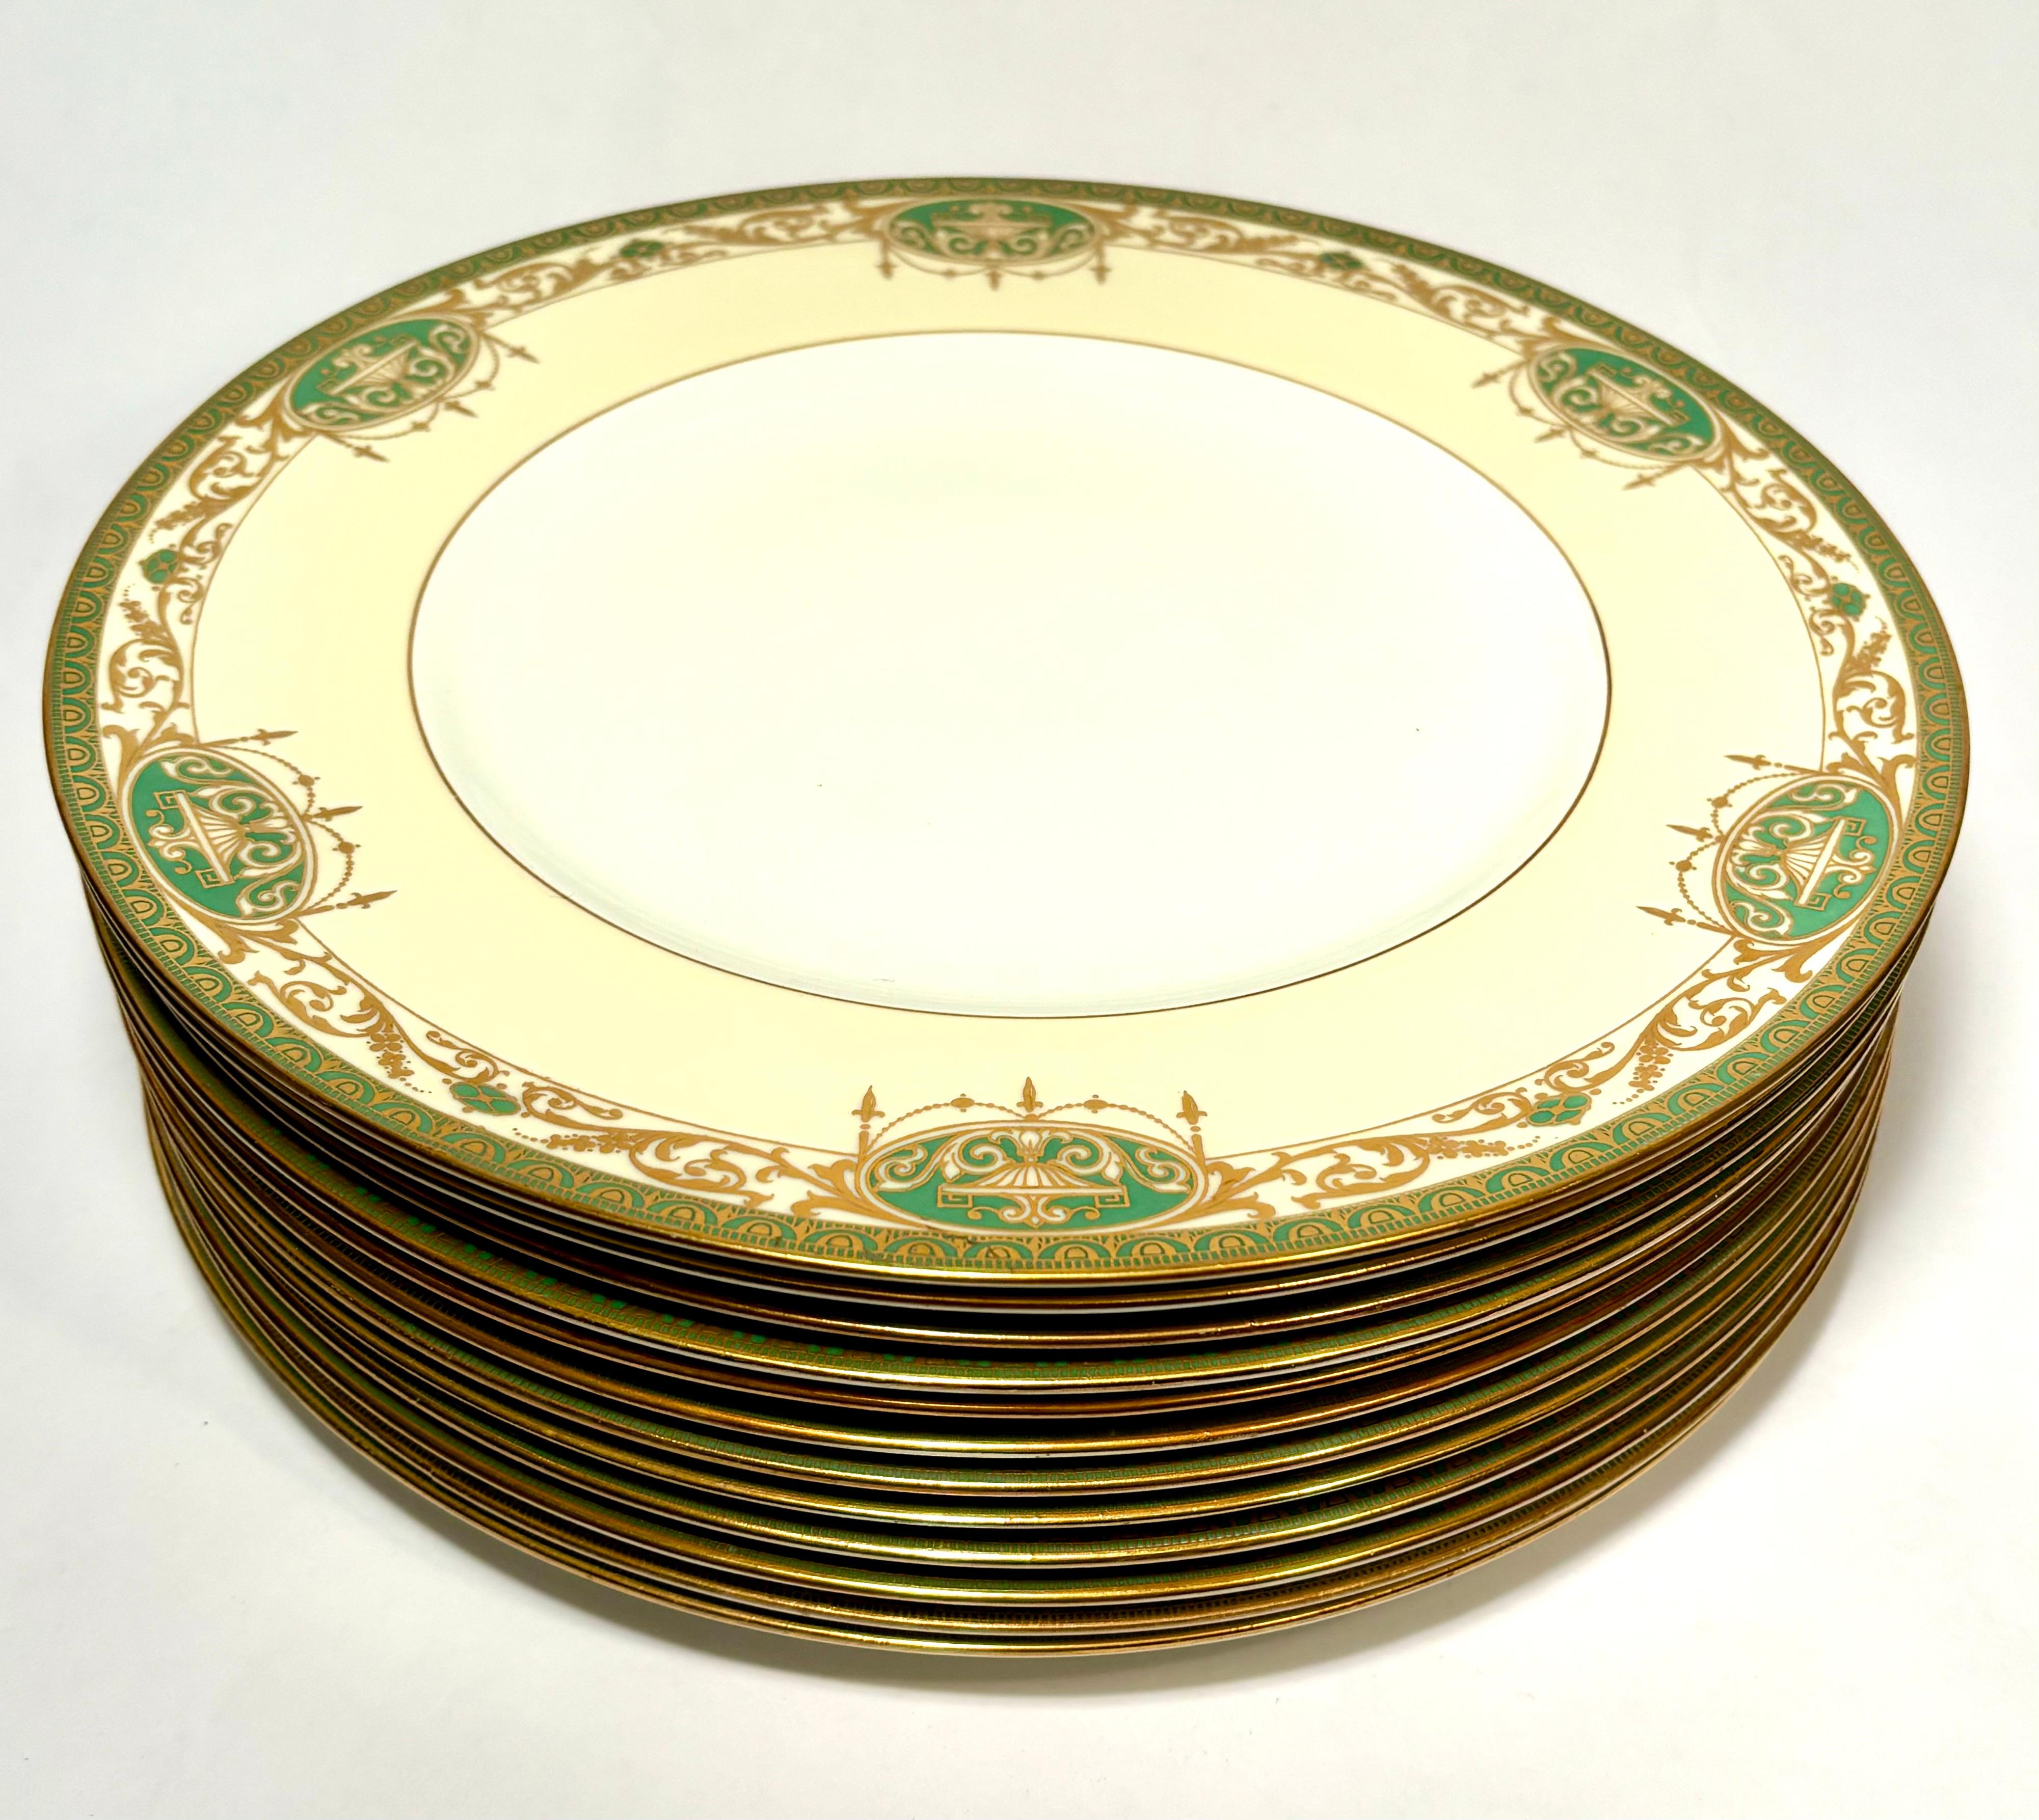 An elegant set of twelve dinner plates from the re known English factory of Royal Worcester. This set features a green and raised gold embossed pattern of classical urn and swag design with just the right amount of cream accent in its collar. In